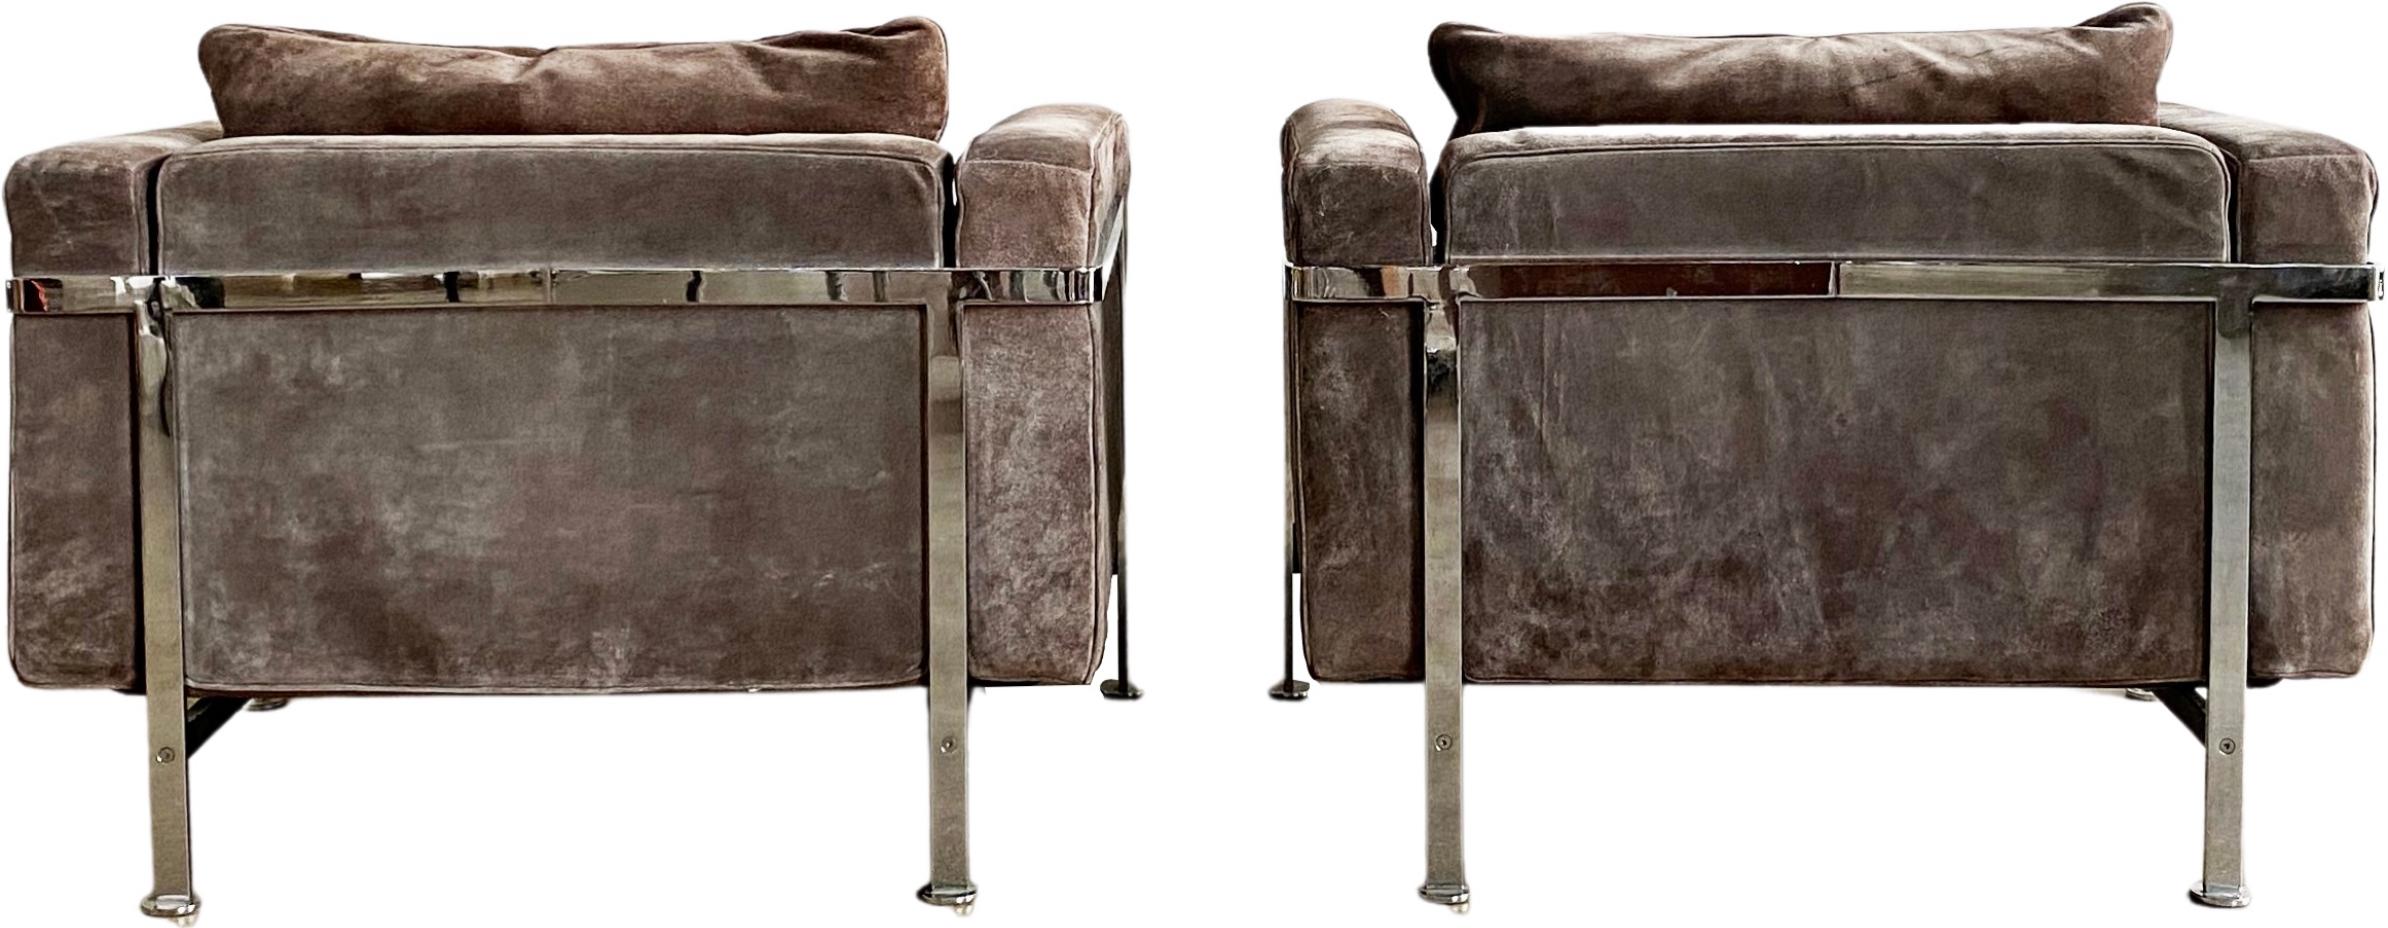 Highly coveted Robert Haussmann De Sede RH 302 lounge armchairs. These suede armchairs are designed with a chromed iron frame that functions as a basket for the cushions. They are heaven to sit in. The thick back and seat cushion provide an